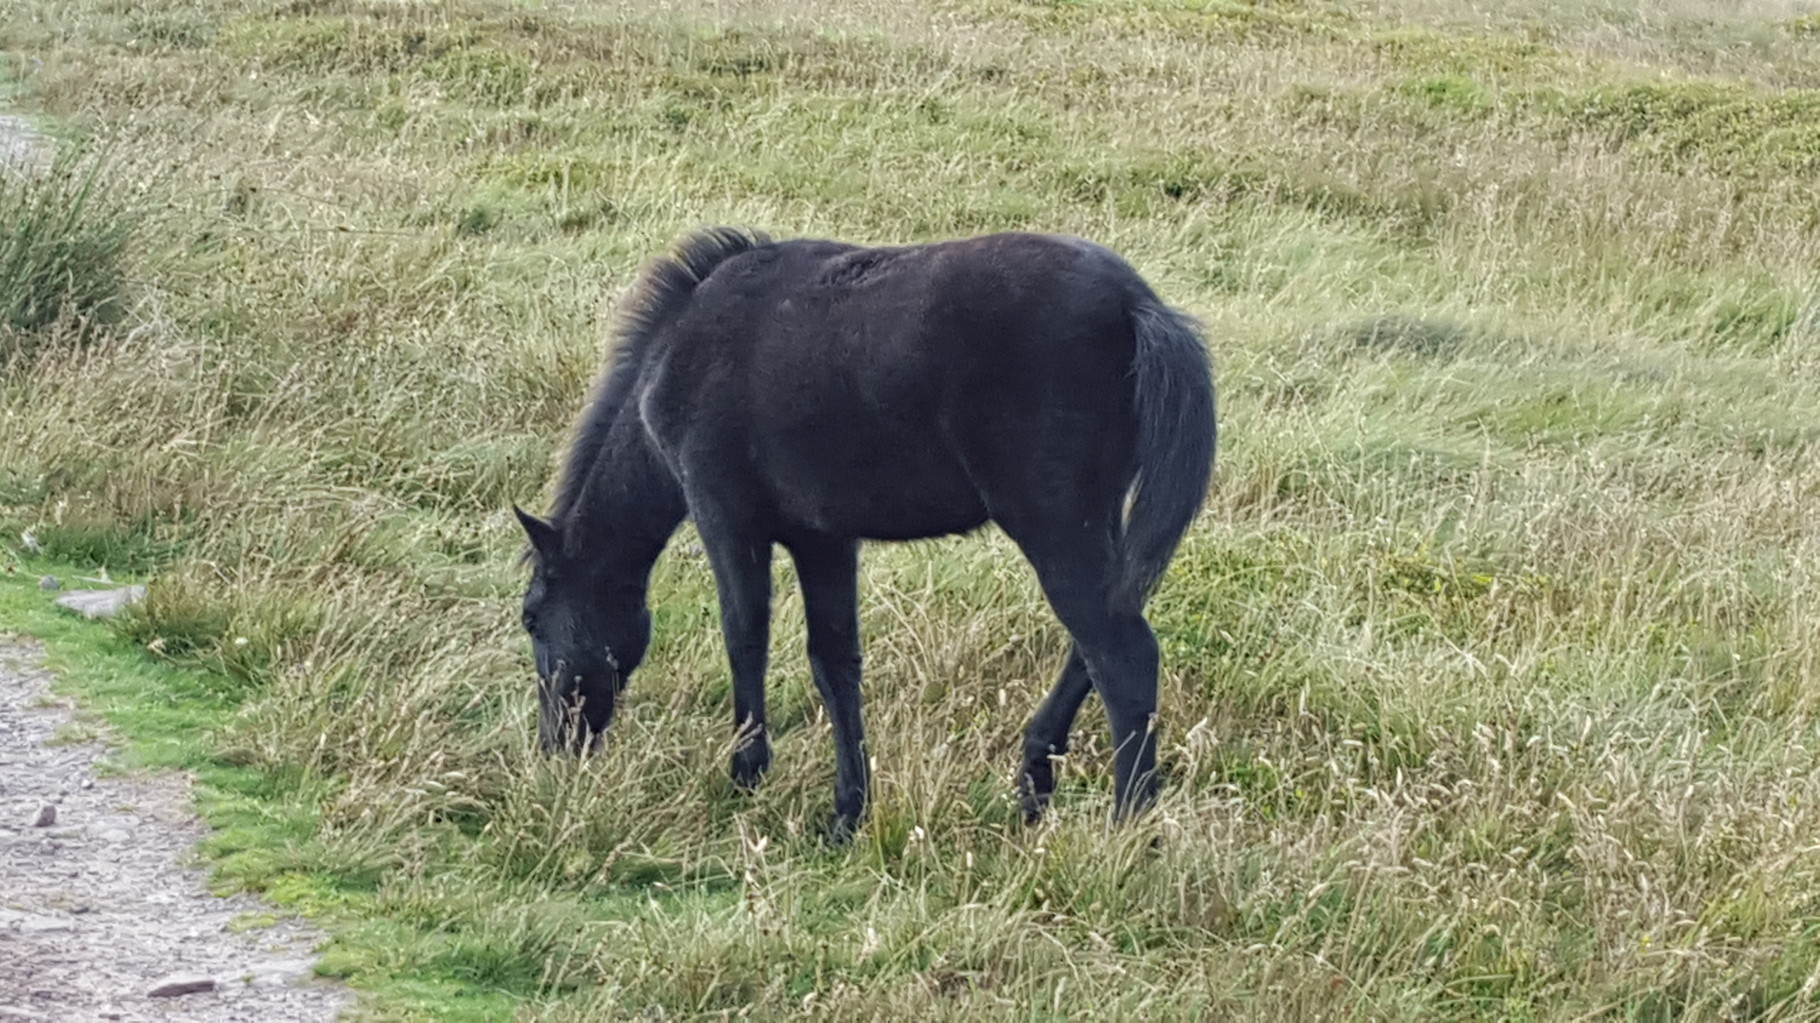 This foal was quite lovely